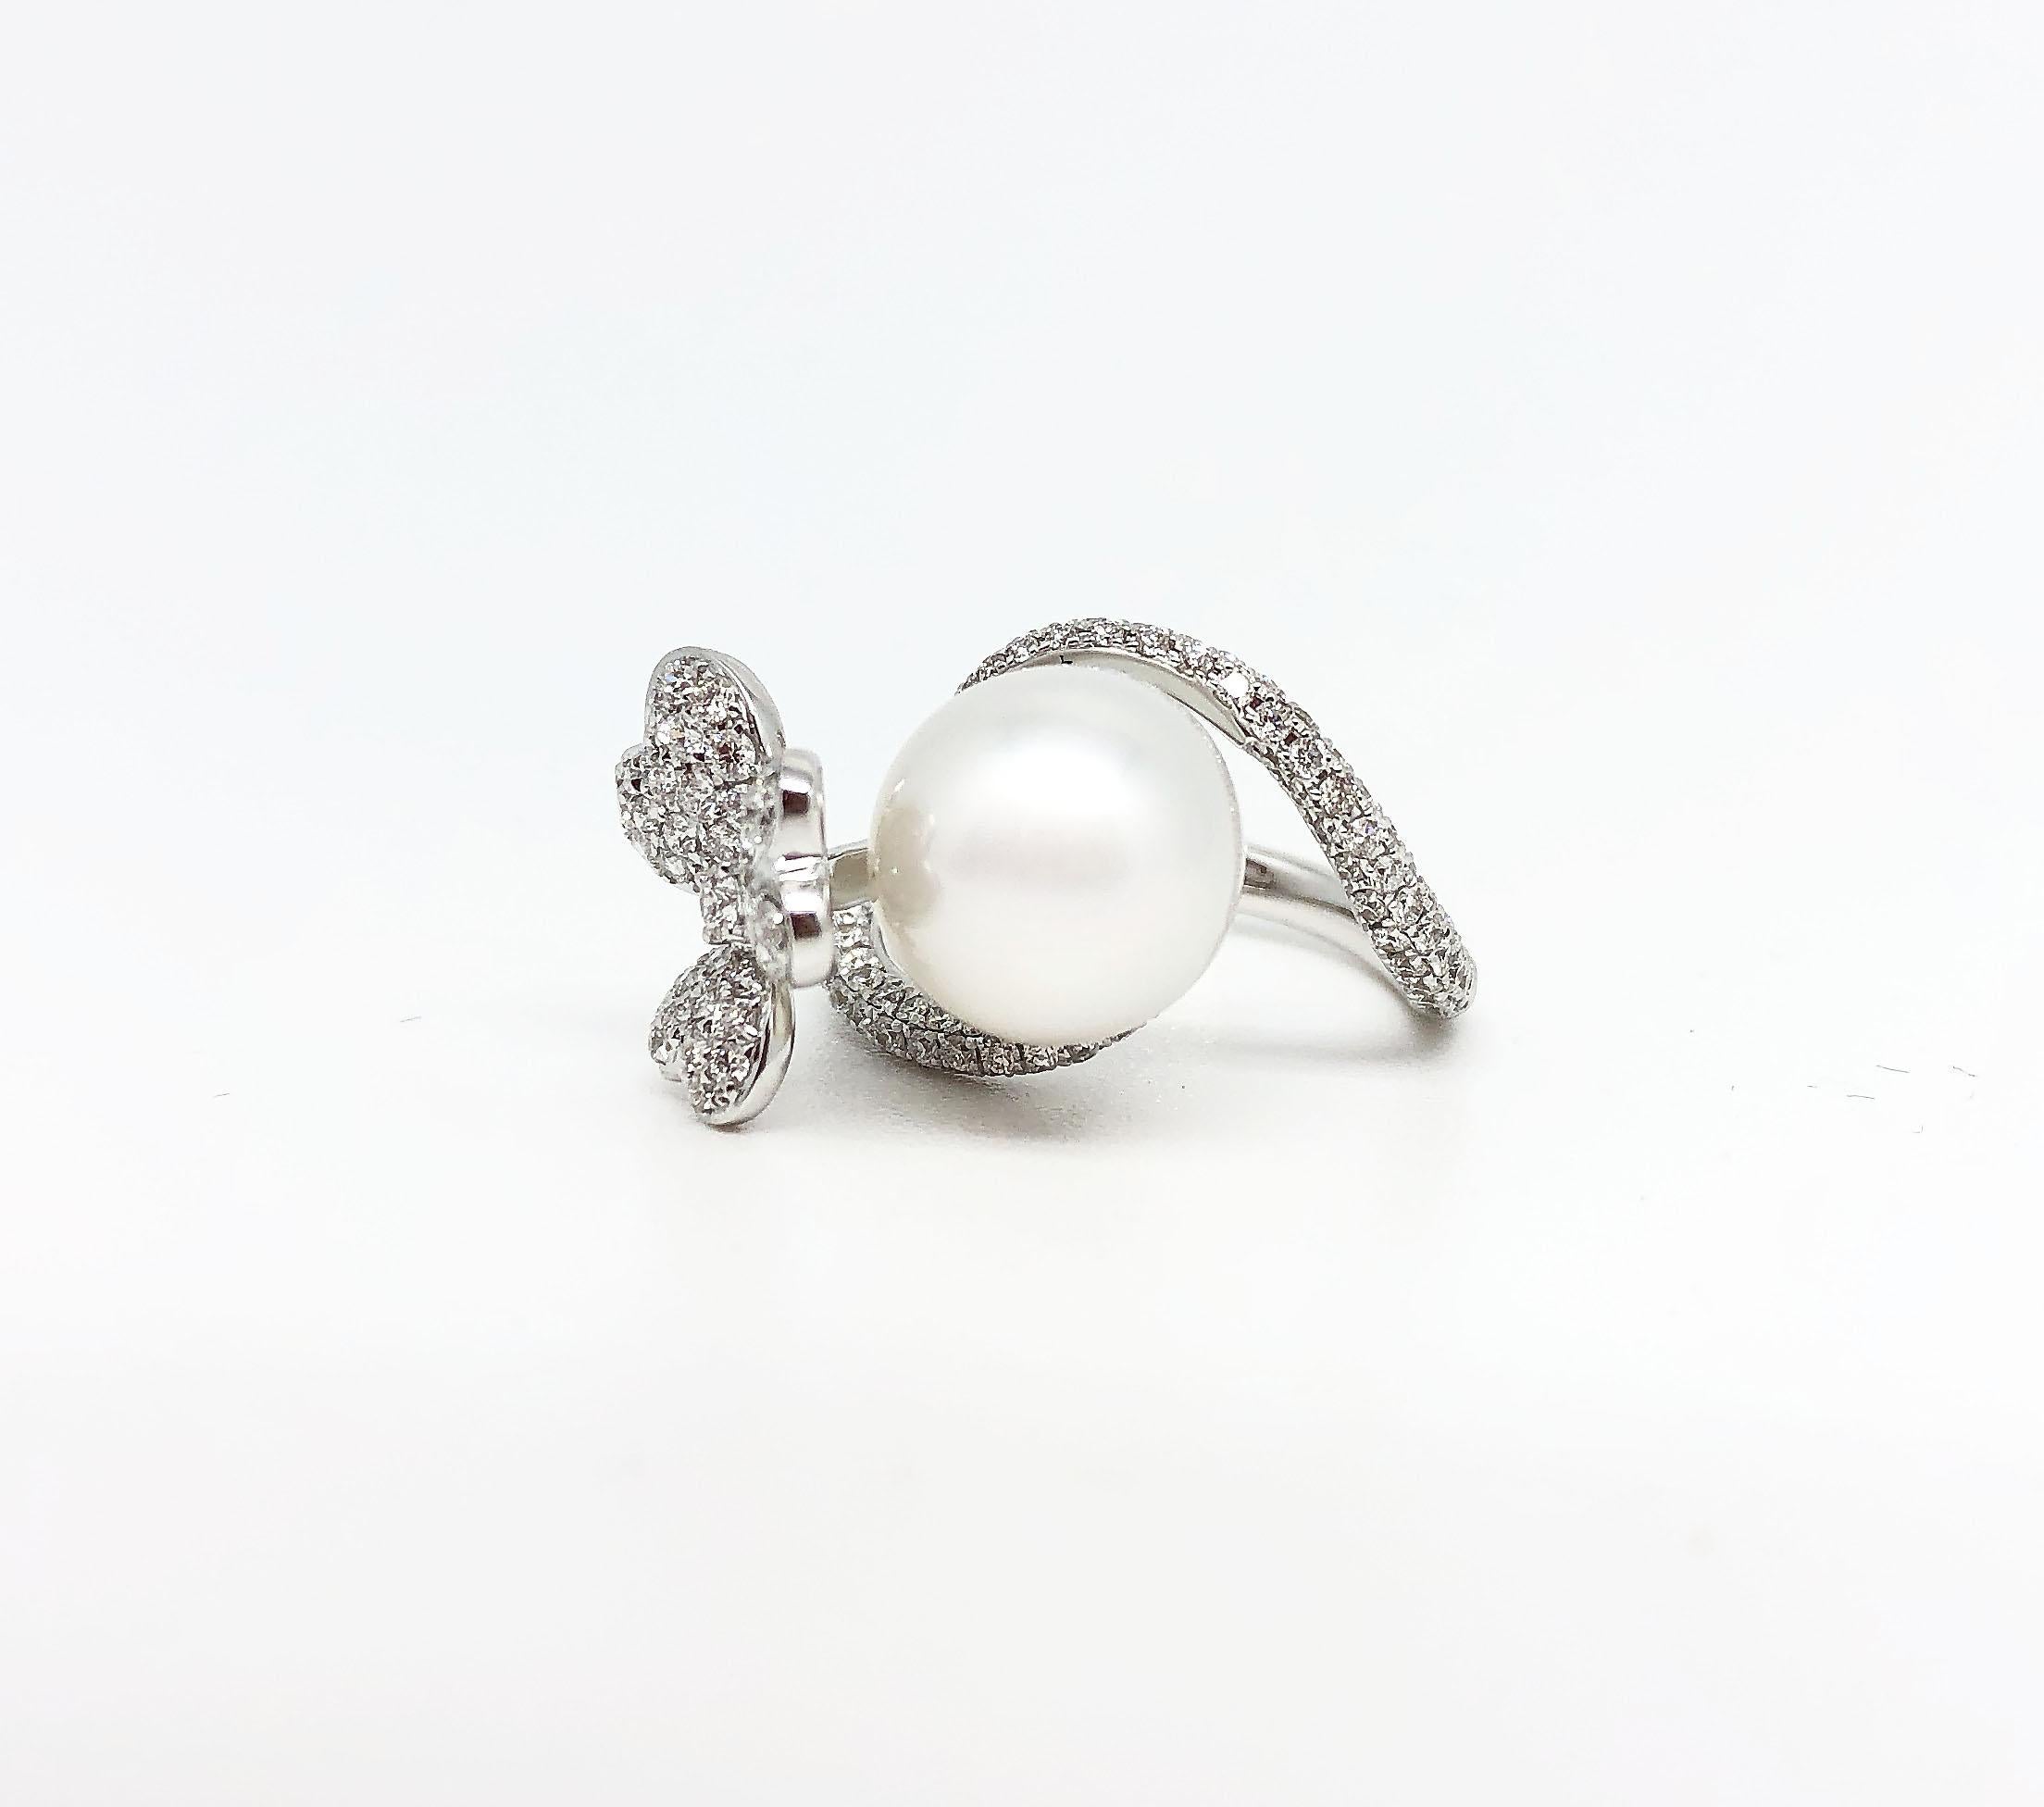 This lovely ring features a beautiful 11mm White Southsea Pearl in good luster and the nearly round shape, accompanied by 1.11 Carat diamonds. The blossom design is your suitable choice of gift all year round and is also perfect for bridal